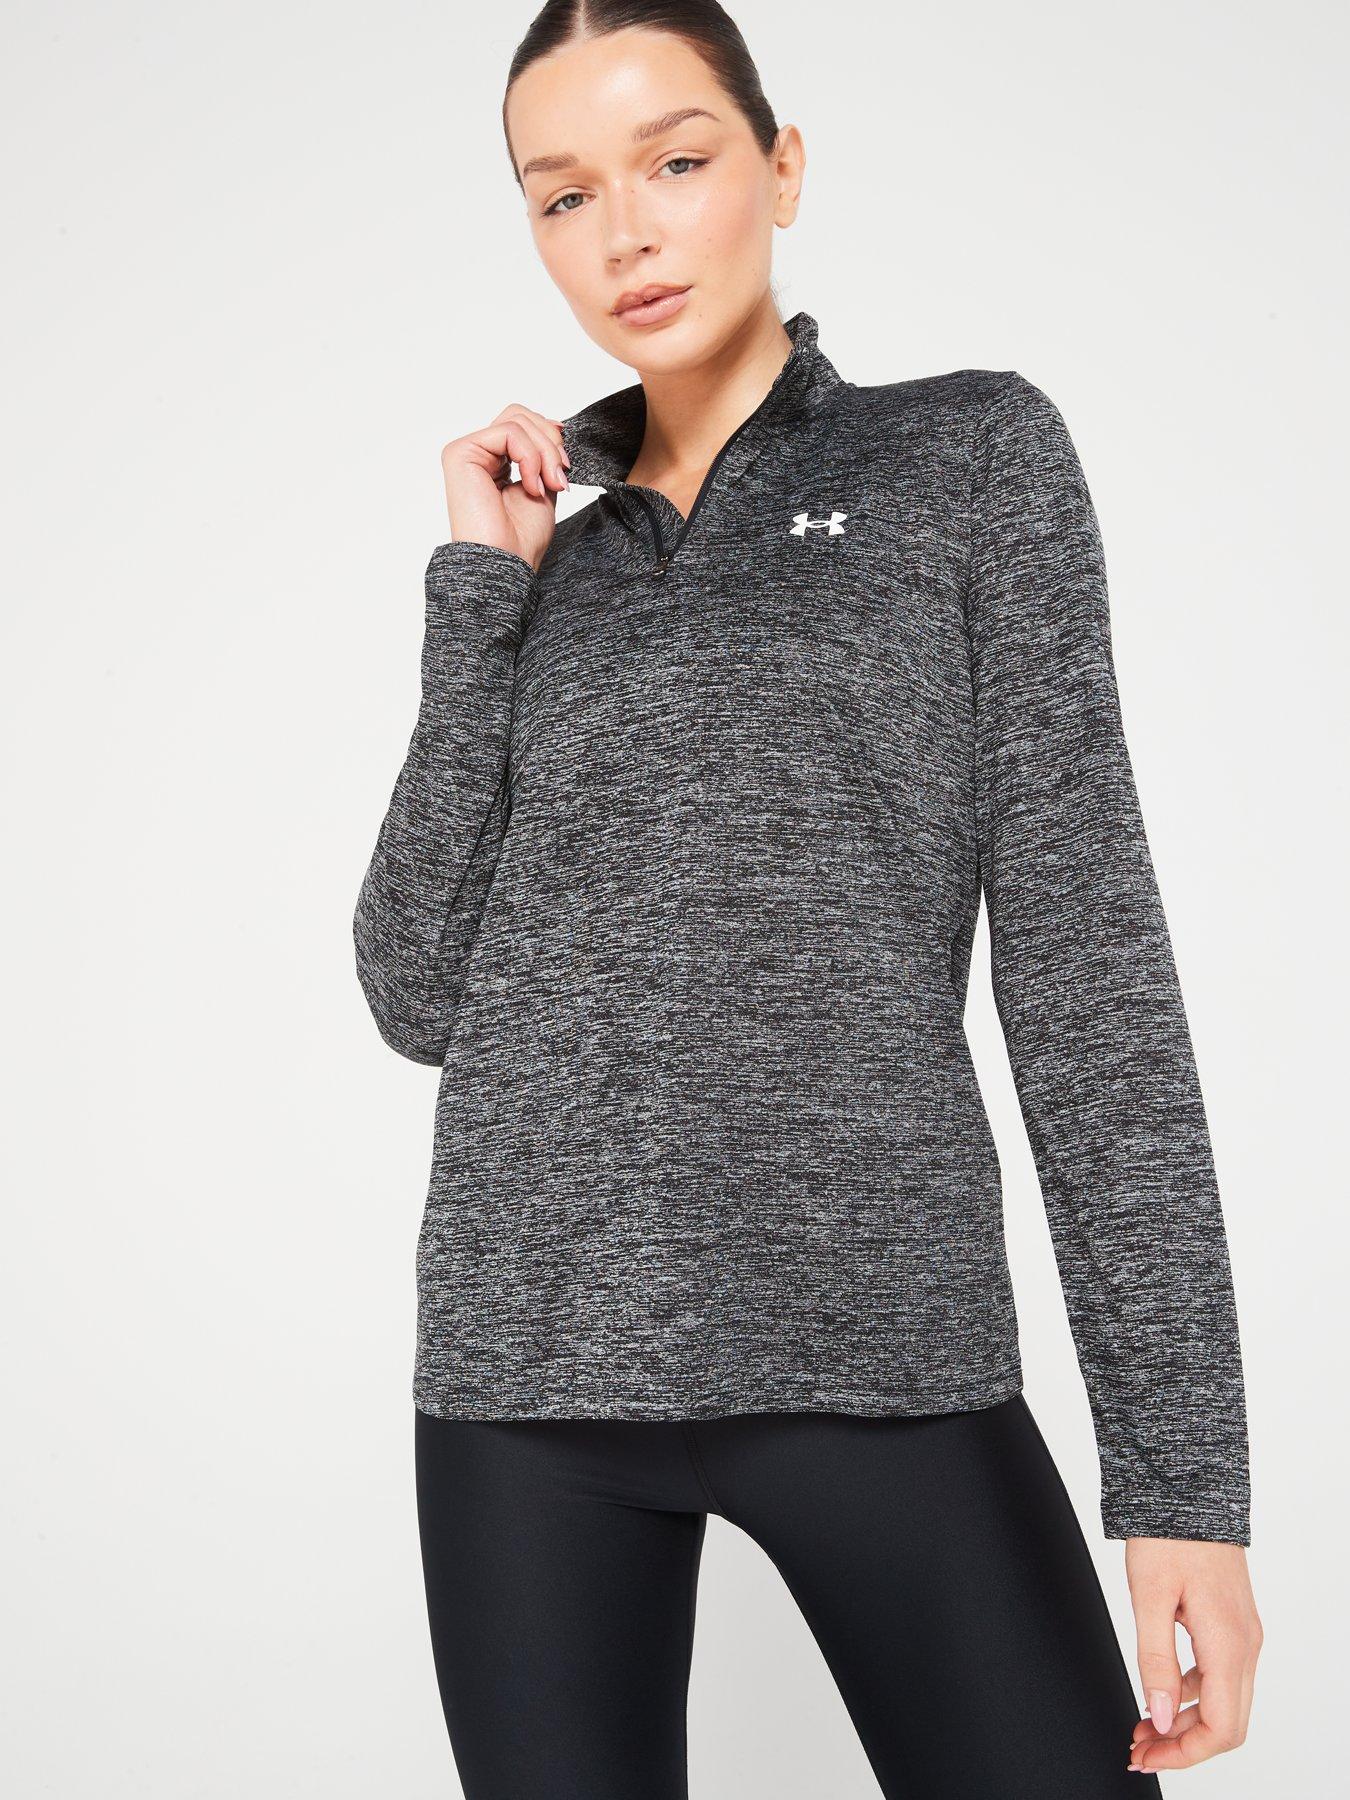  Under Armour Women's Authentics ColdGear ¼ Zip T-Shirt, Black  (001)/White, X-Small : Clothing, Shoes & Jewelry